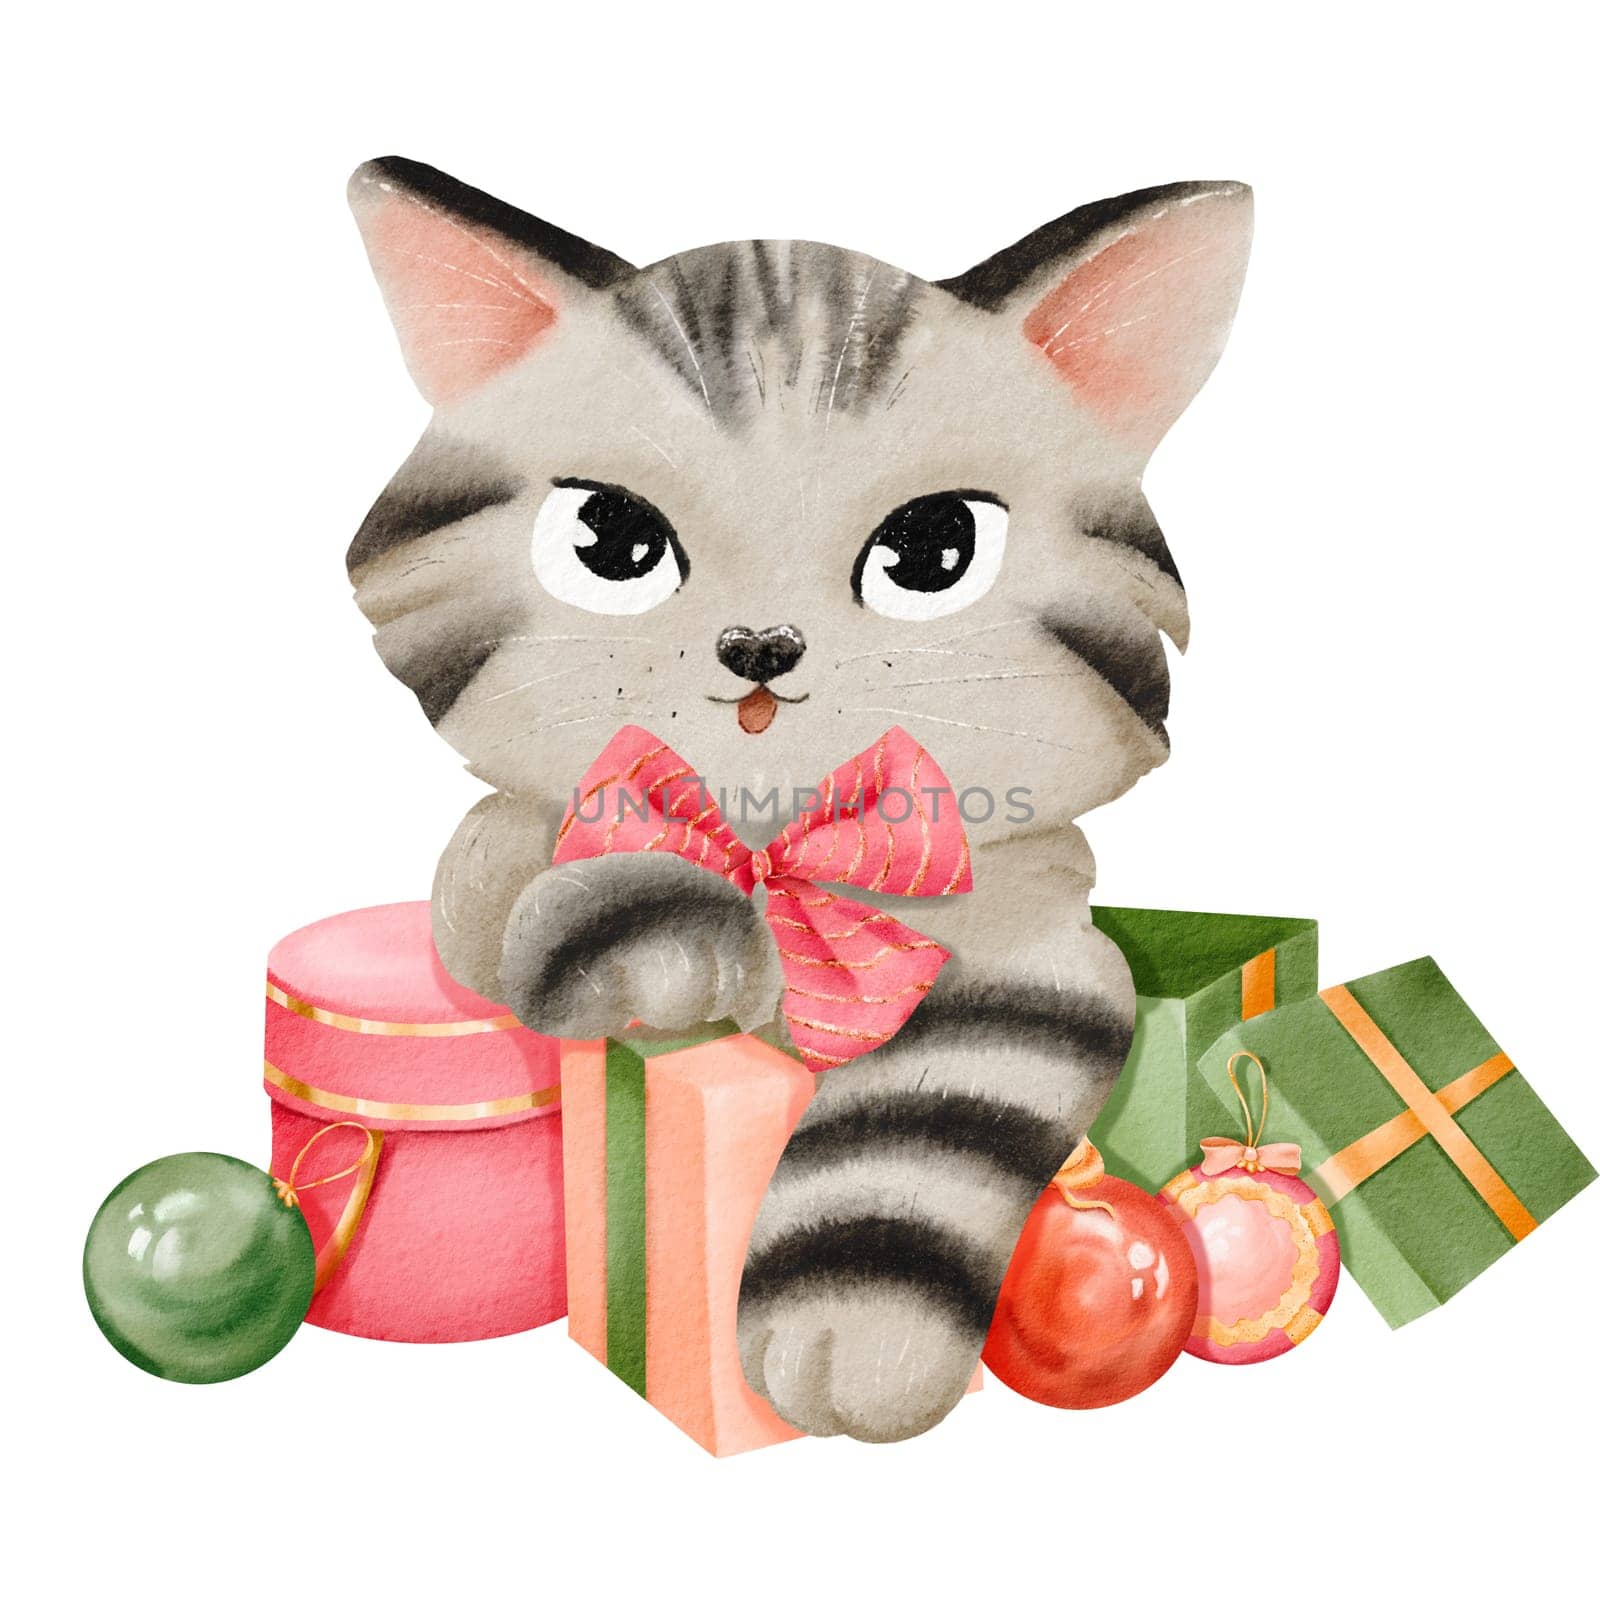 New year scene. Striped cat with a Christmas bow lounges on colorful gift boxes and Christmas balls. Cartoon kitten portrait. Festive mood. cards, invites, posters, stickers. Watercolor illustration.